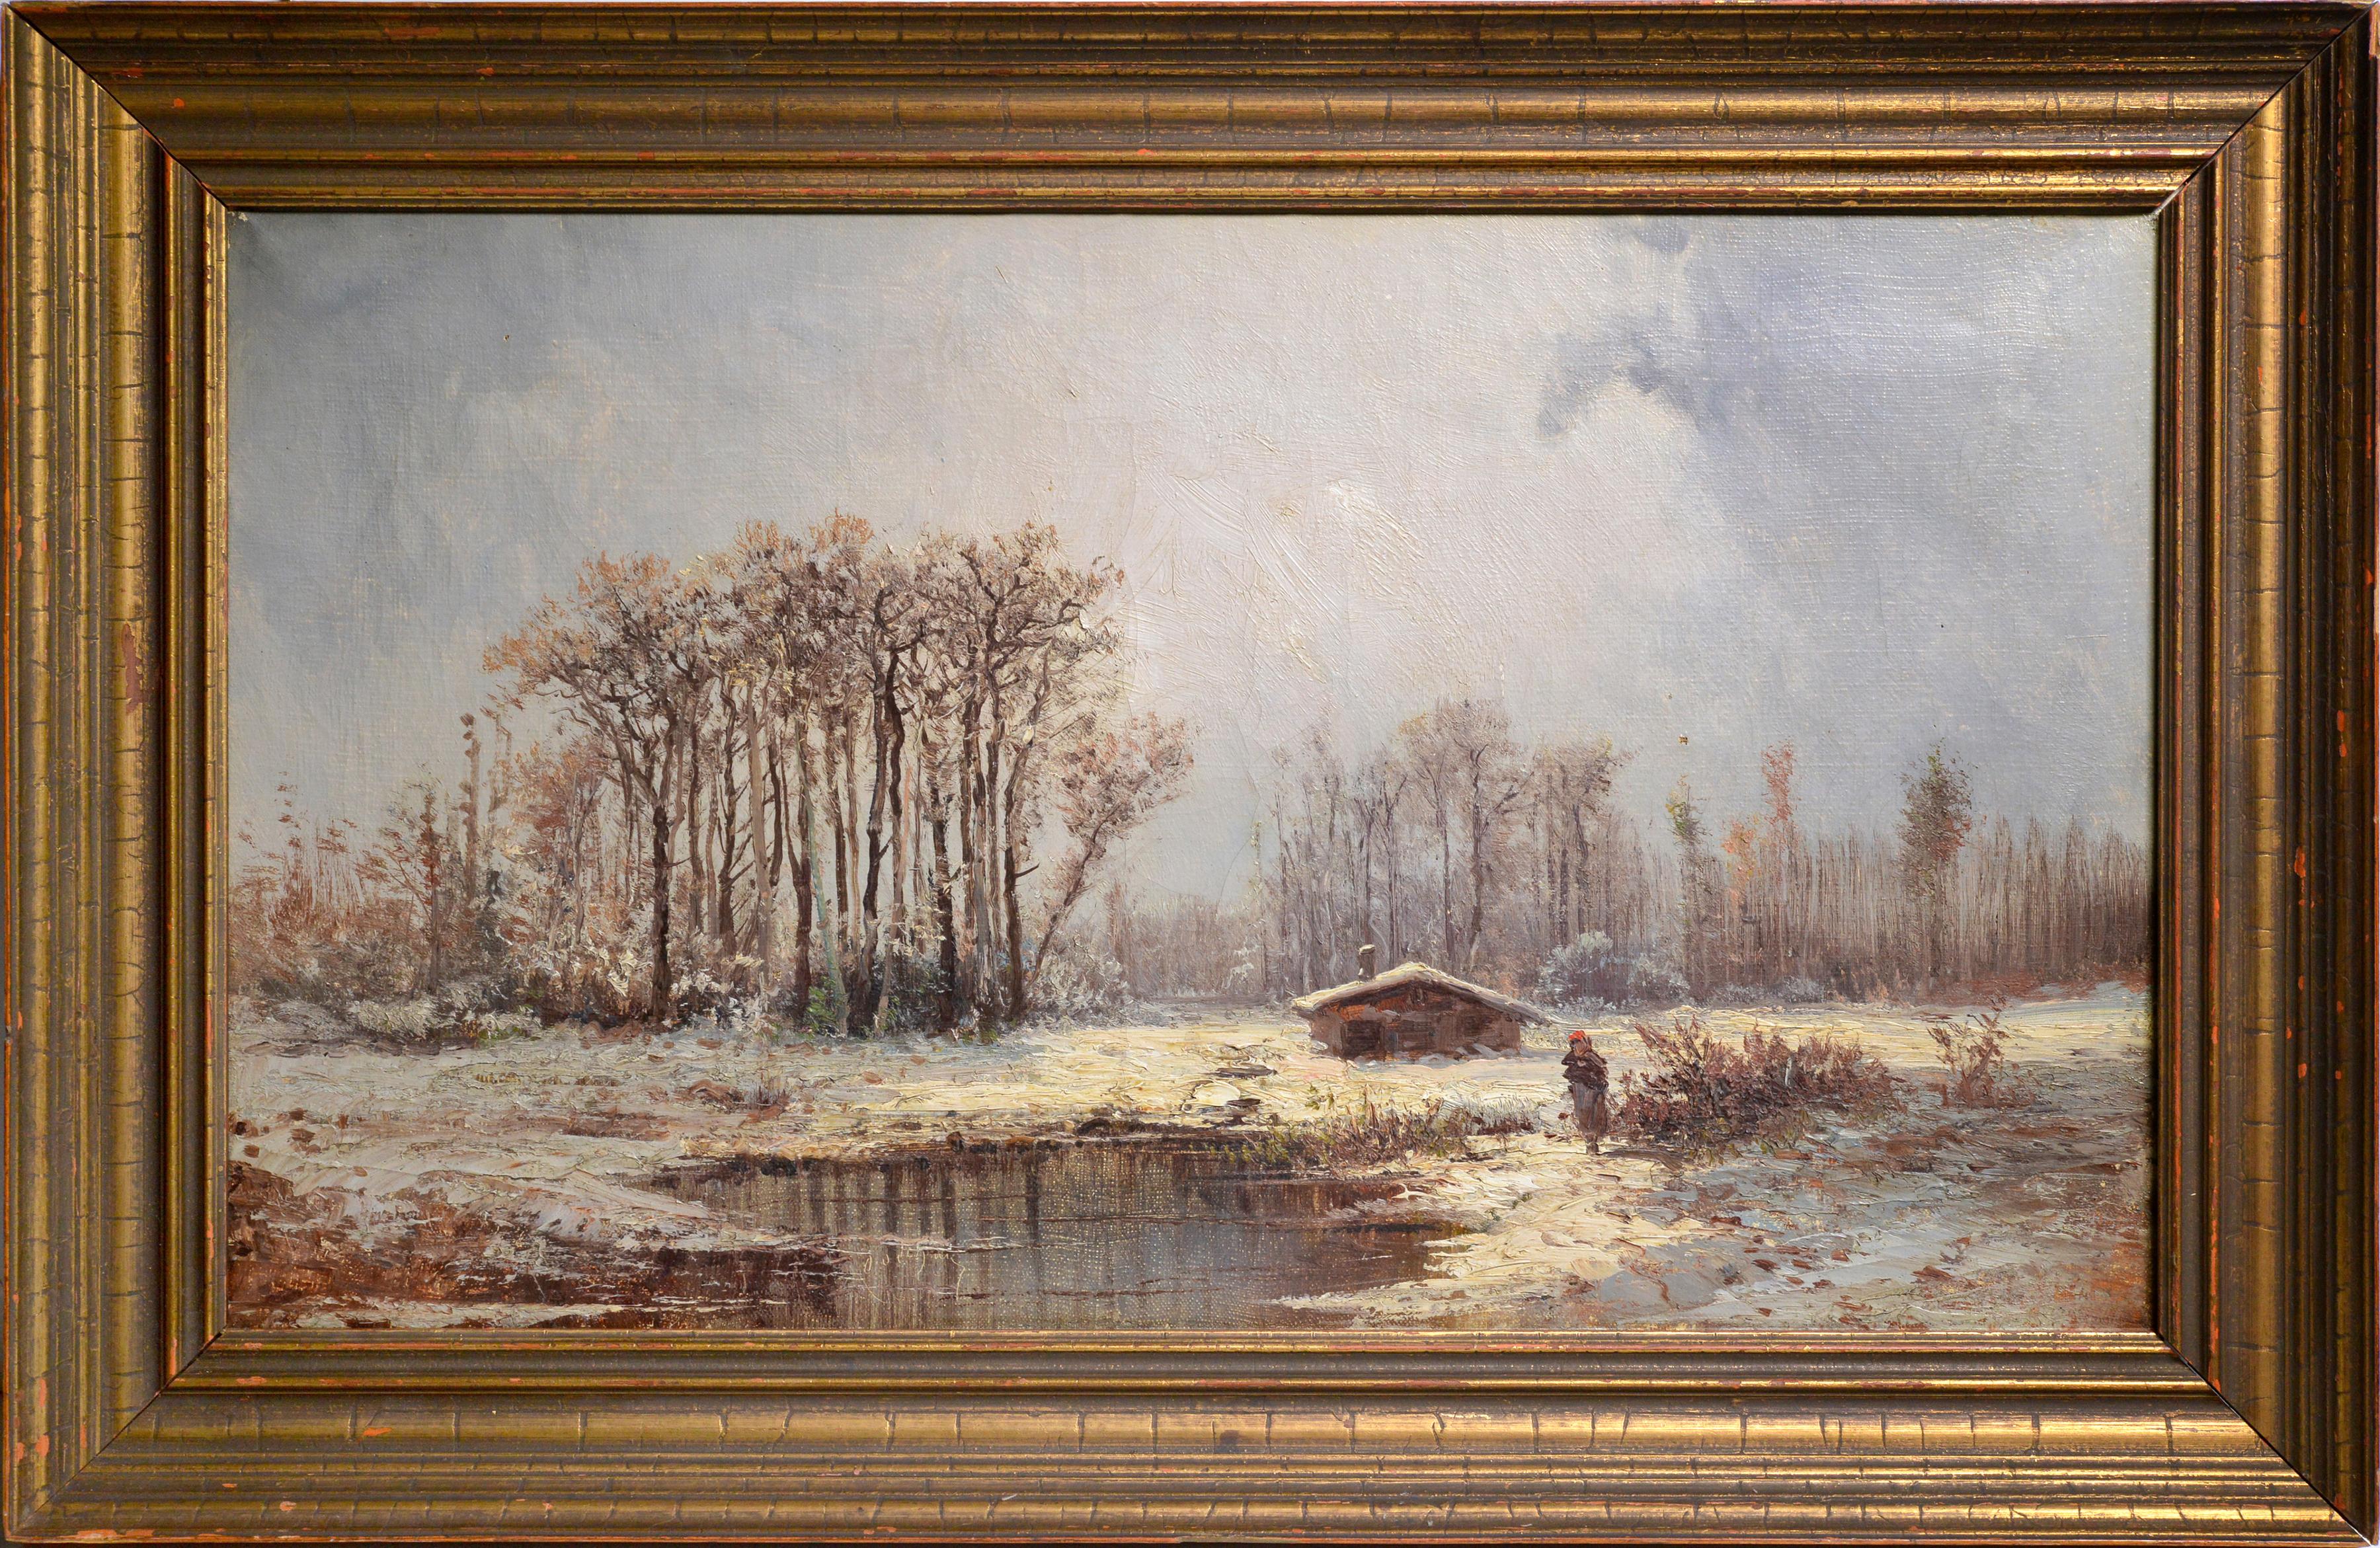 Emile Godchaux Figurative Painting - Spring Thaw Barbizon Landscape 19th century Oil painting by French Impressionist